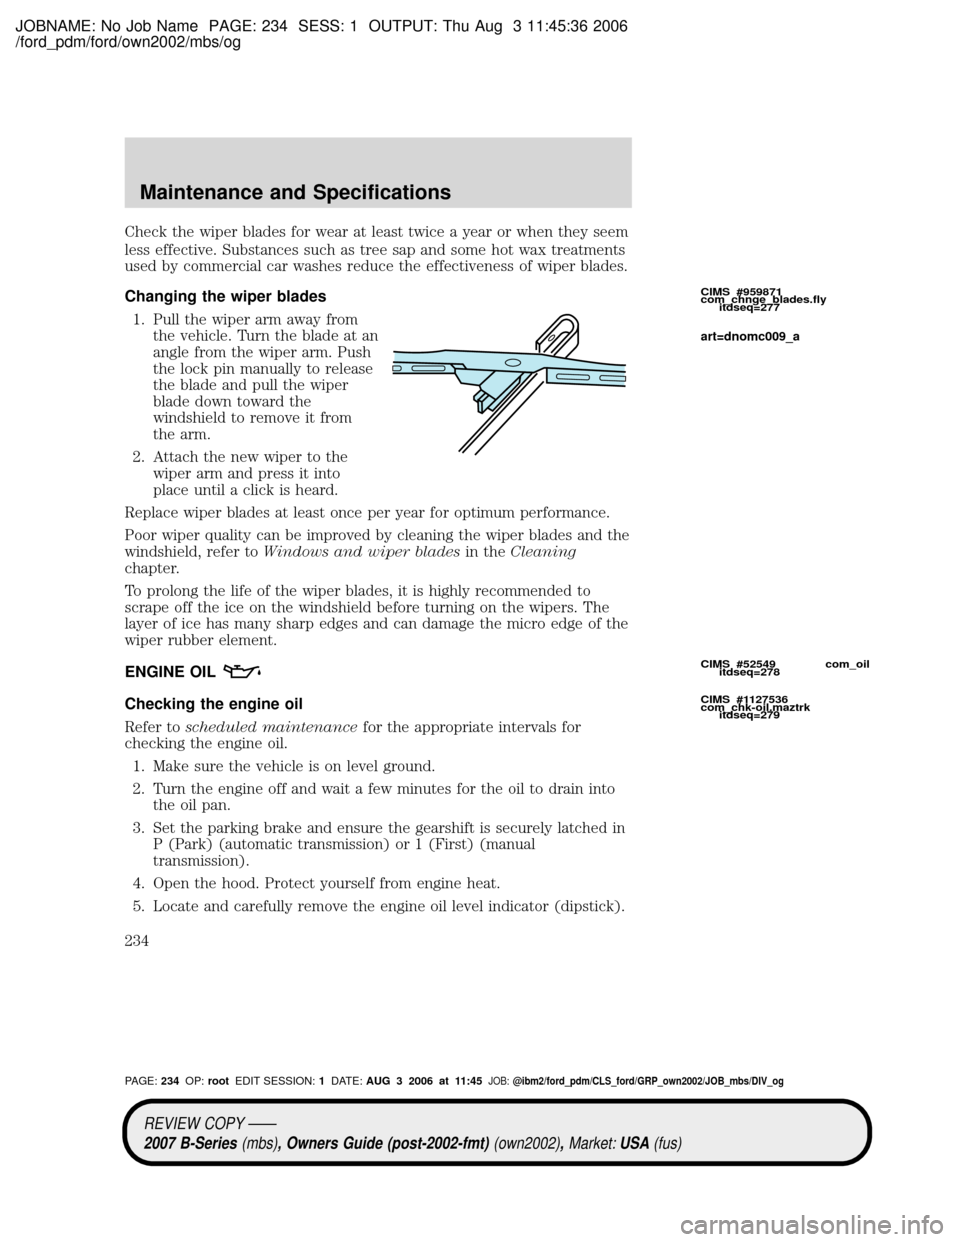 MAZDA MODEL B2300 TRUCK 2007  Owners Manual (in English) JOBNAME: No Job Name PAGE: 234 SESS: 1 OUTPUT: Thu Aug 3 11:45:36 2006
/ford_pdm/ford/own2002/mbs/og
Check the wiper blades for wear at least twice a year or when they seem
less effective. Substances 